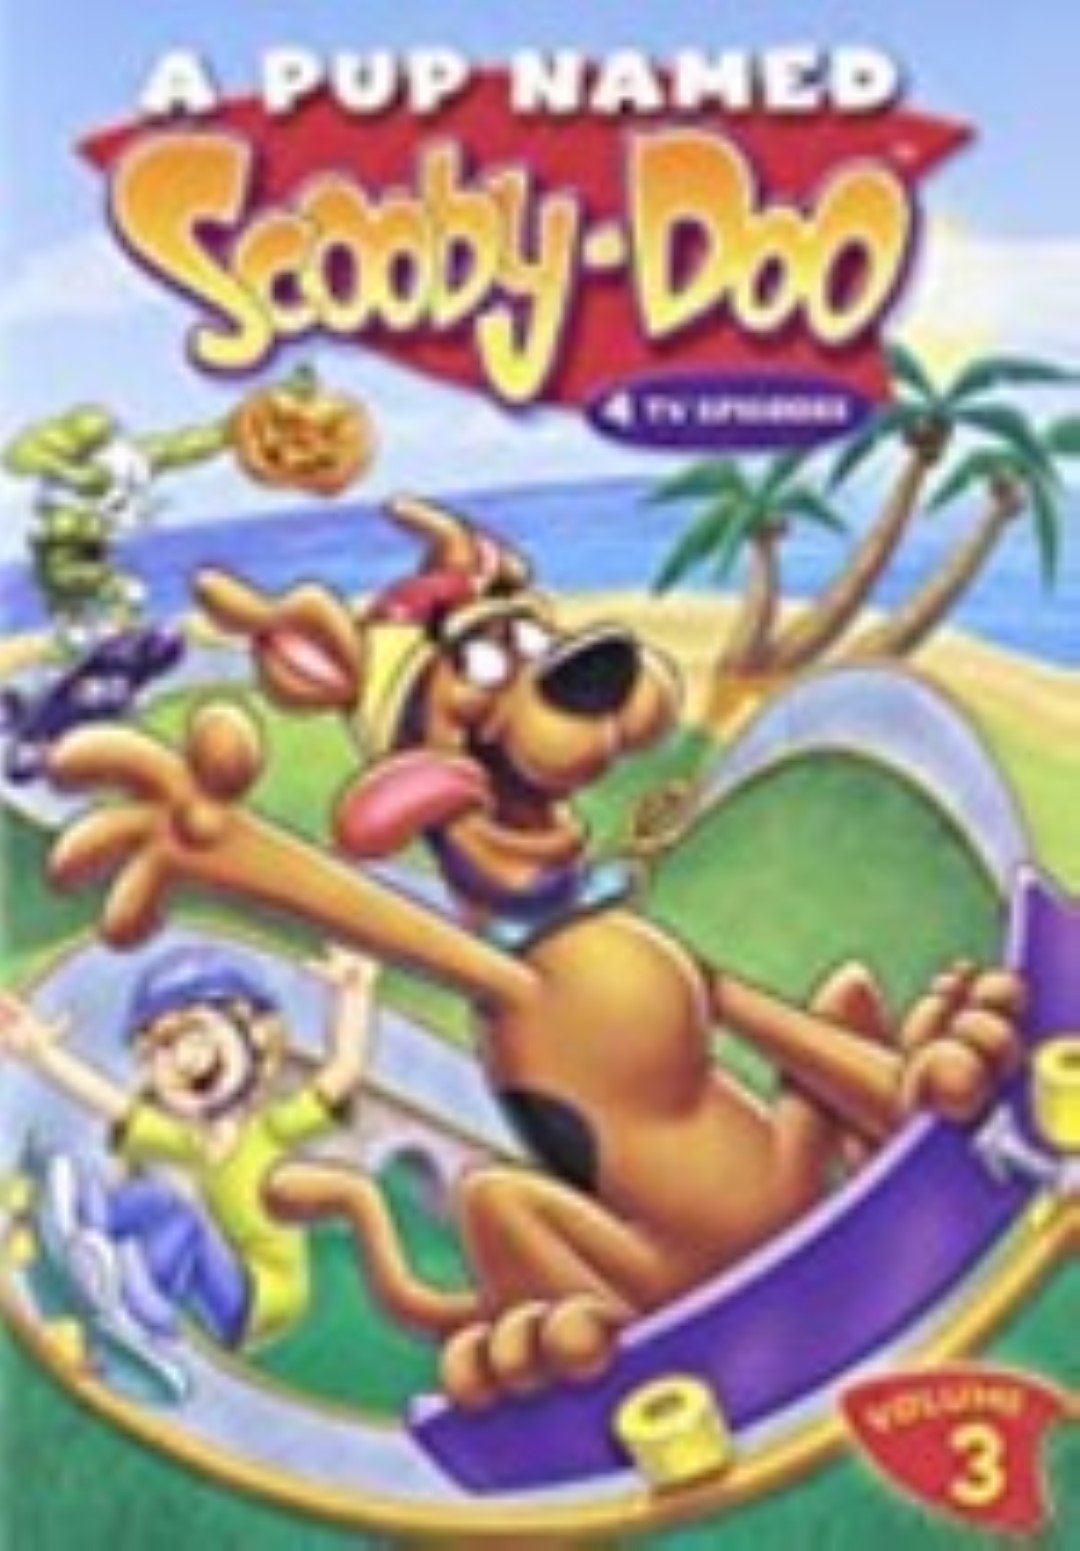 Primary image for A Pup Named Scooby-Doo, Vol. 3 Dvd